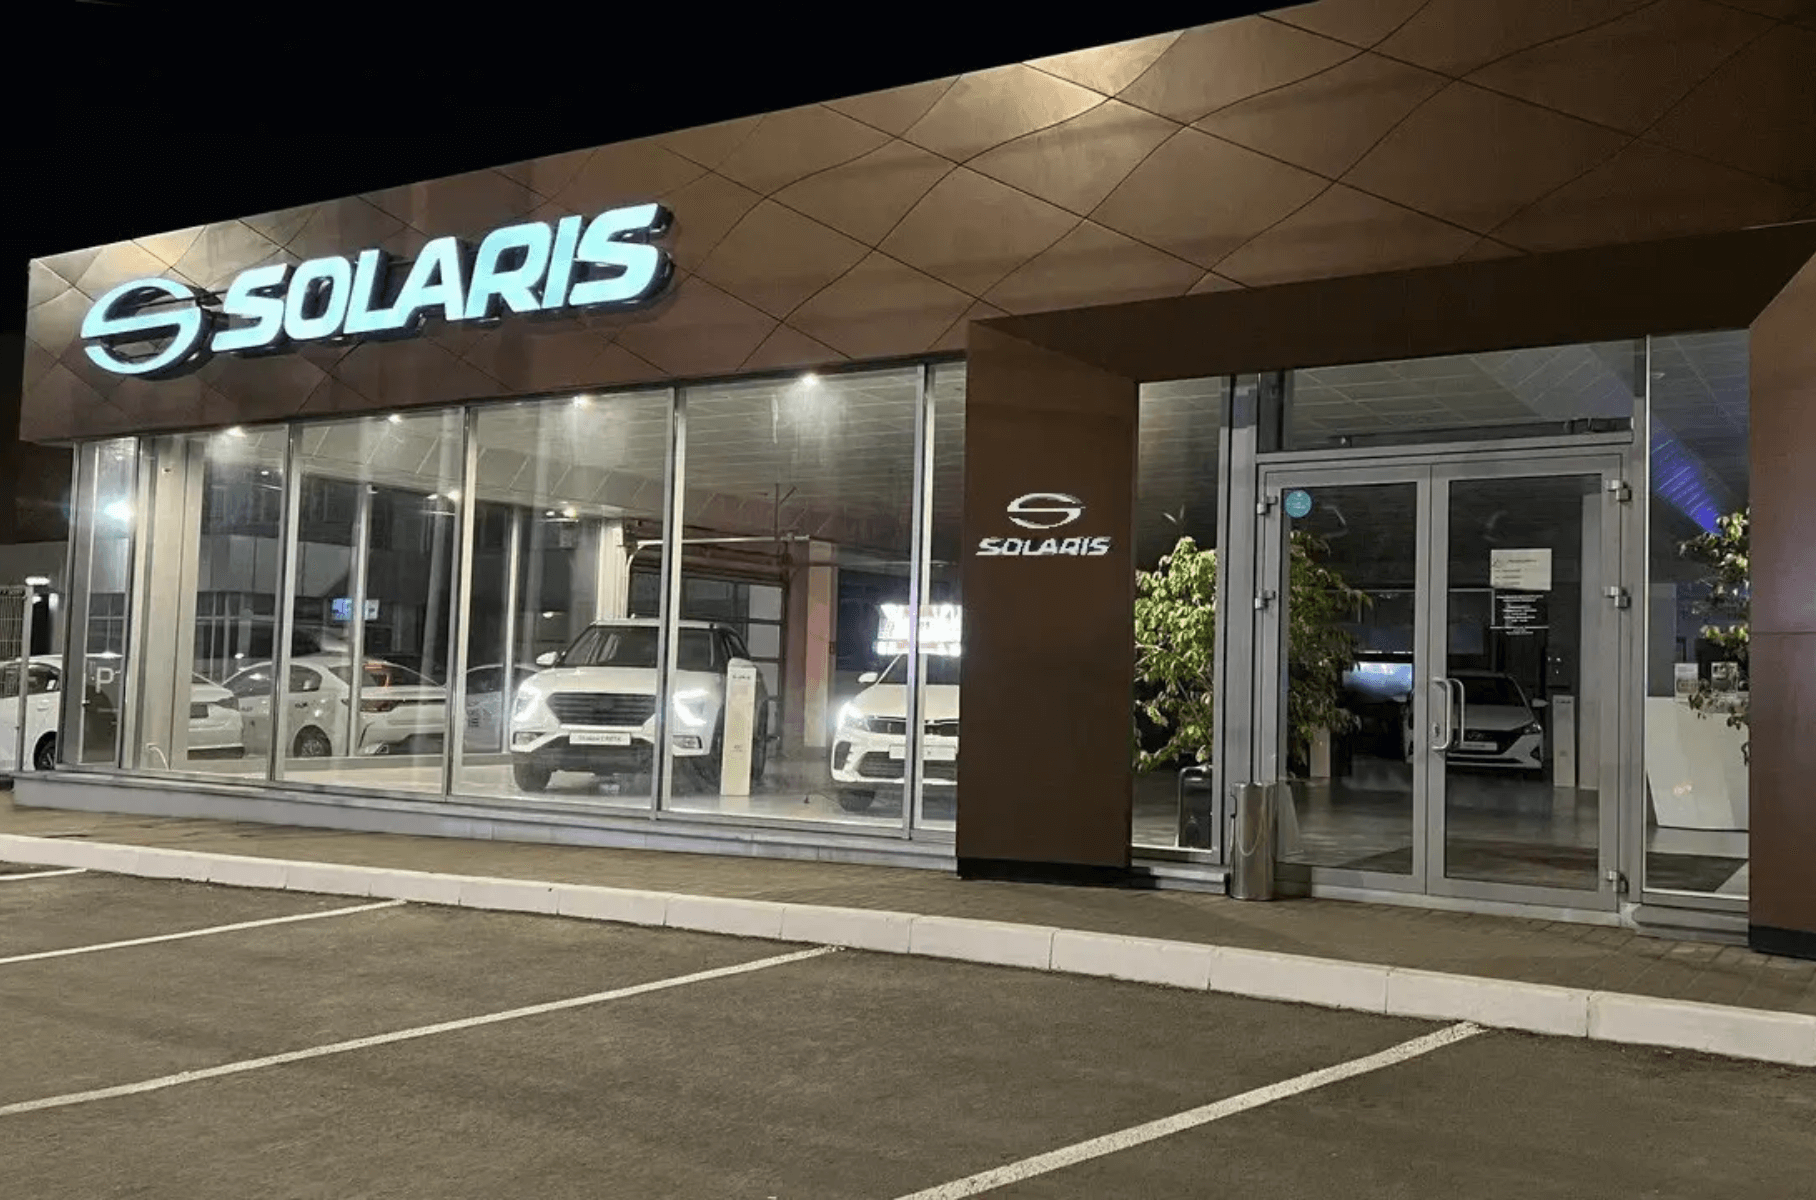 The Solaris brand now has branded car dealerships